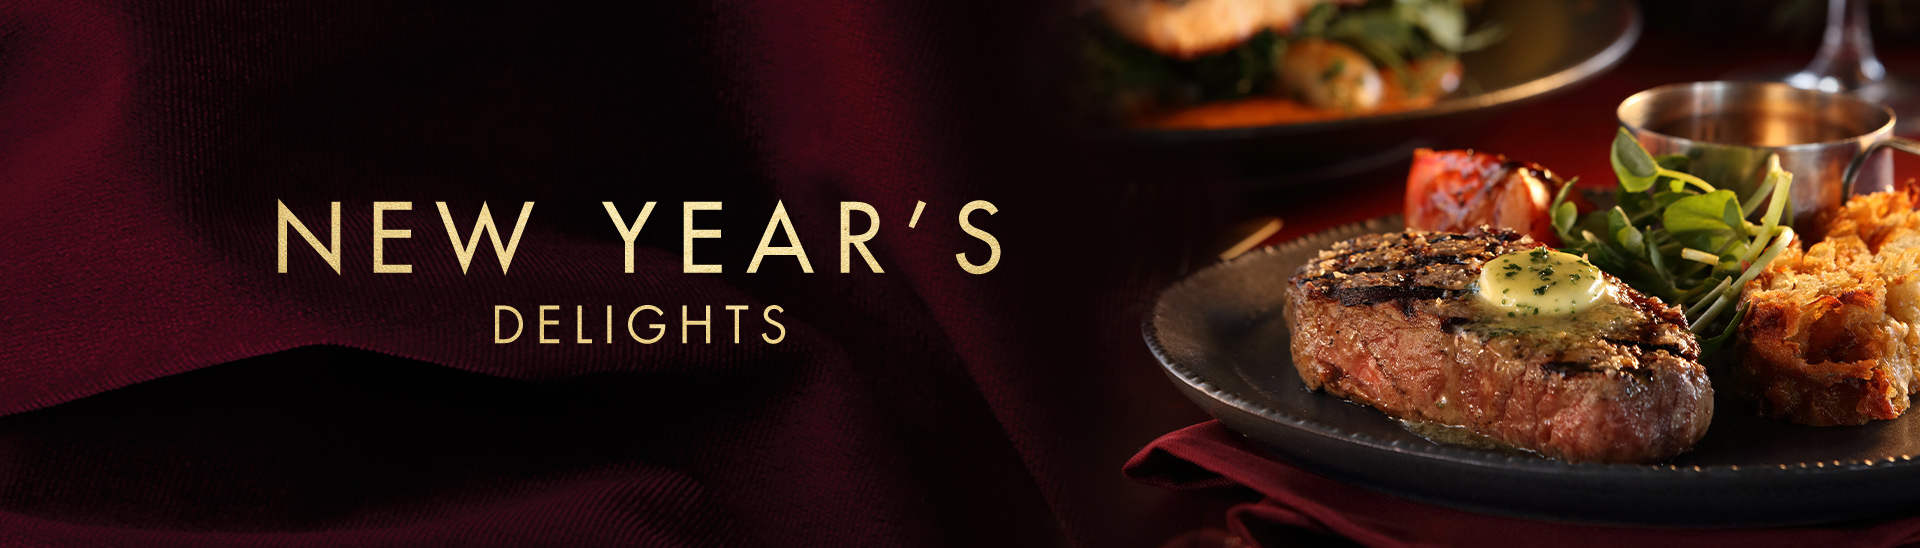 New Year’s Eve 2019 at Miller & Carter Lytham St Annes